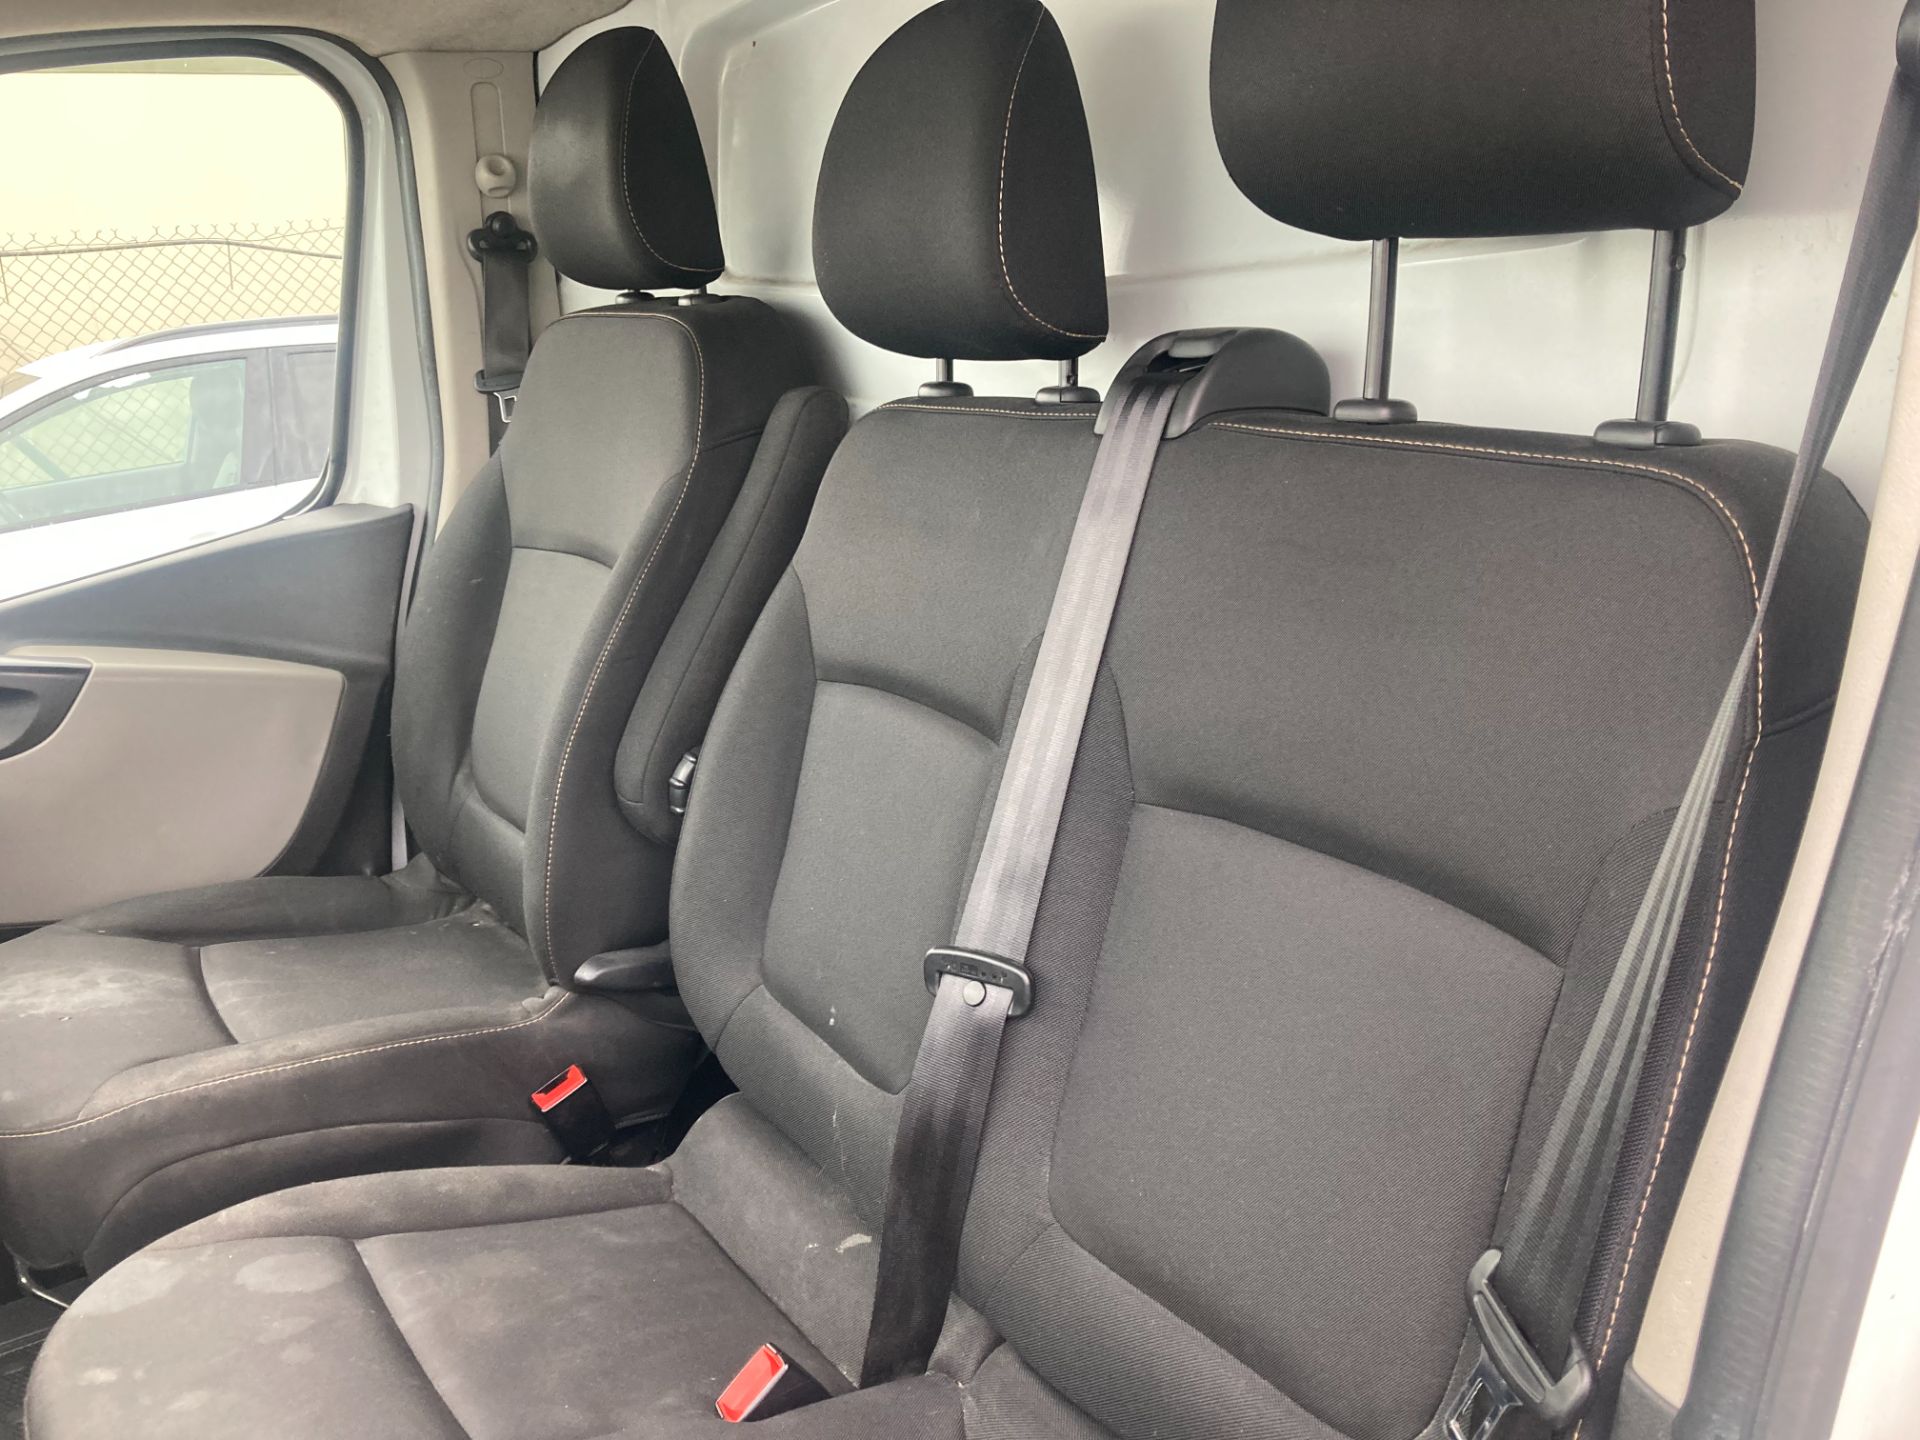 2019 Renault Trafic LL29 DCI 120 Business (191D11604) Image 11